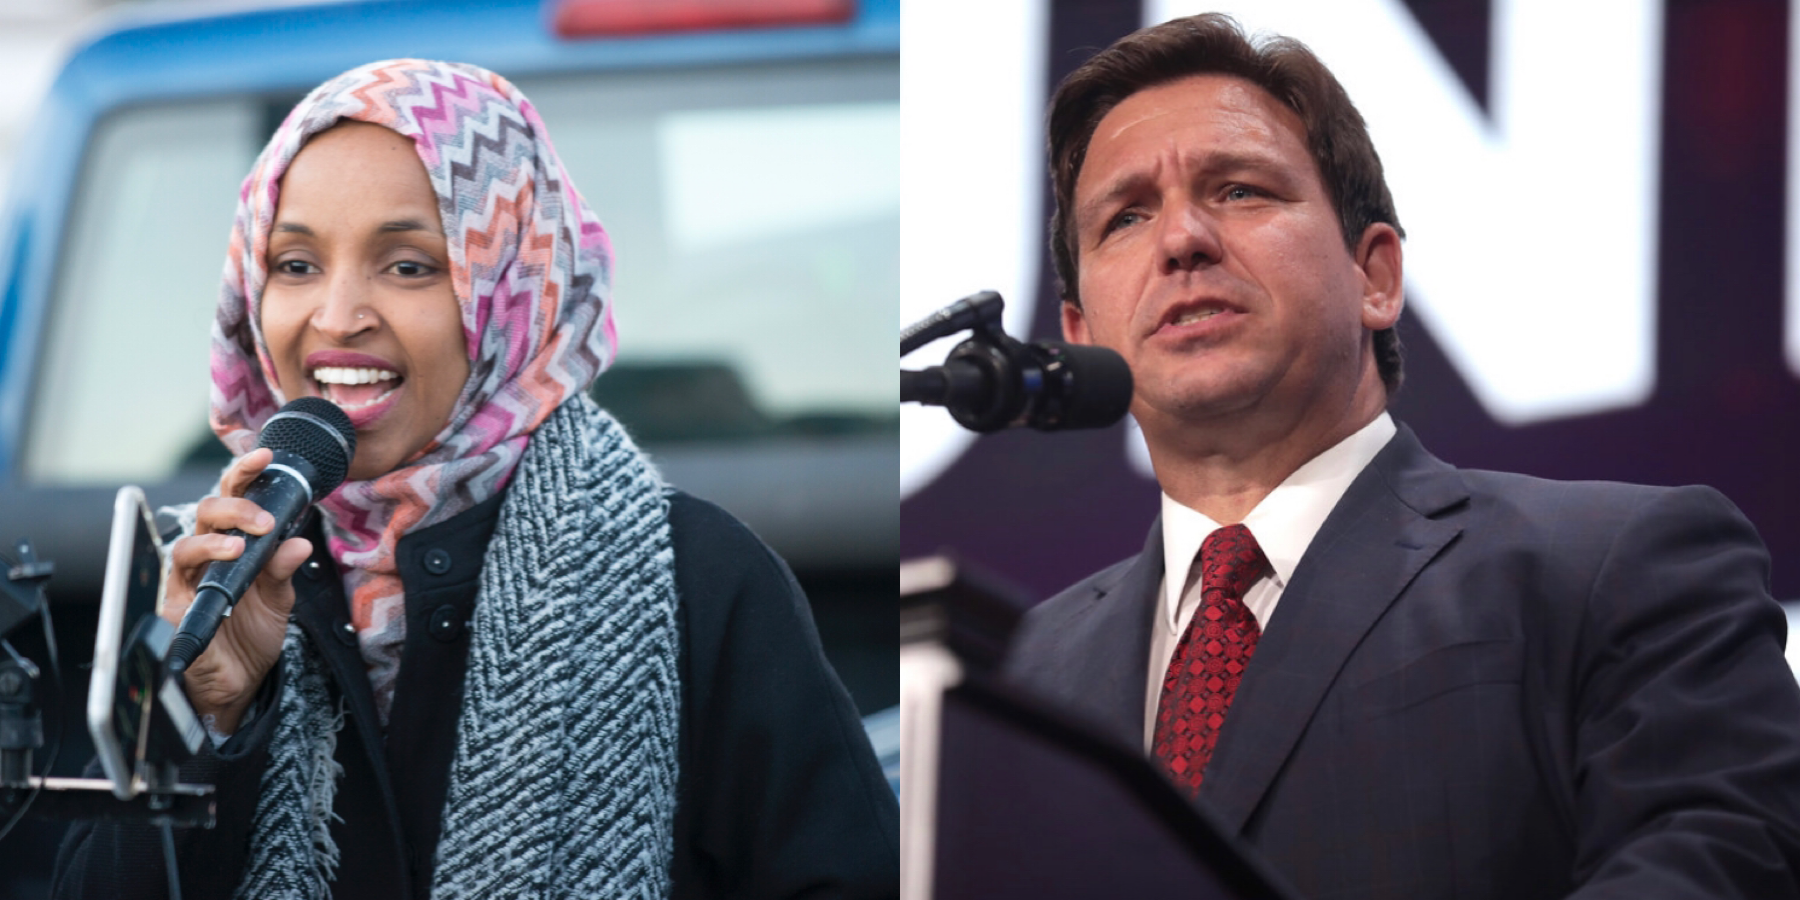 DeSantis Calls For Ilhan Omar To Be Deported After She Vowed To Put ‘Somalia First’ – Trump News Today